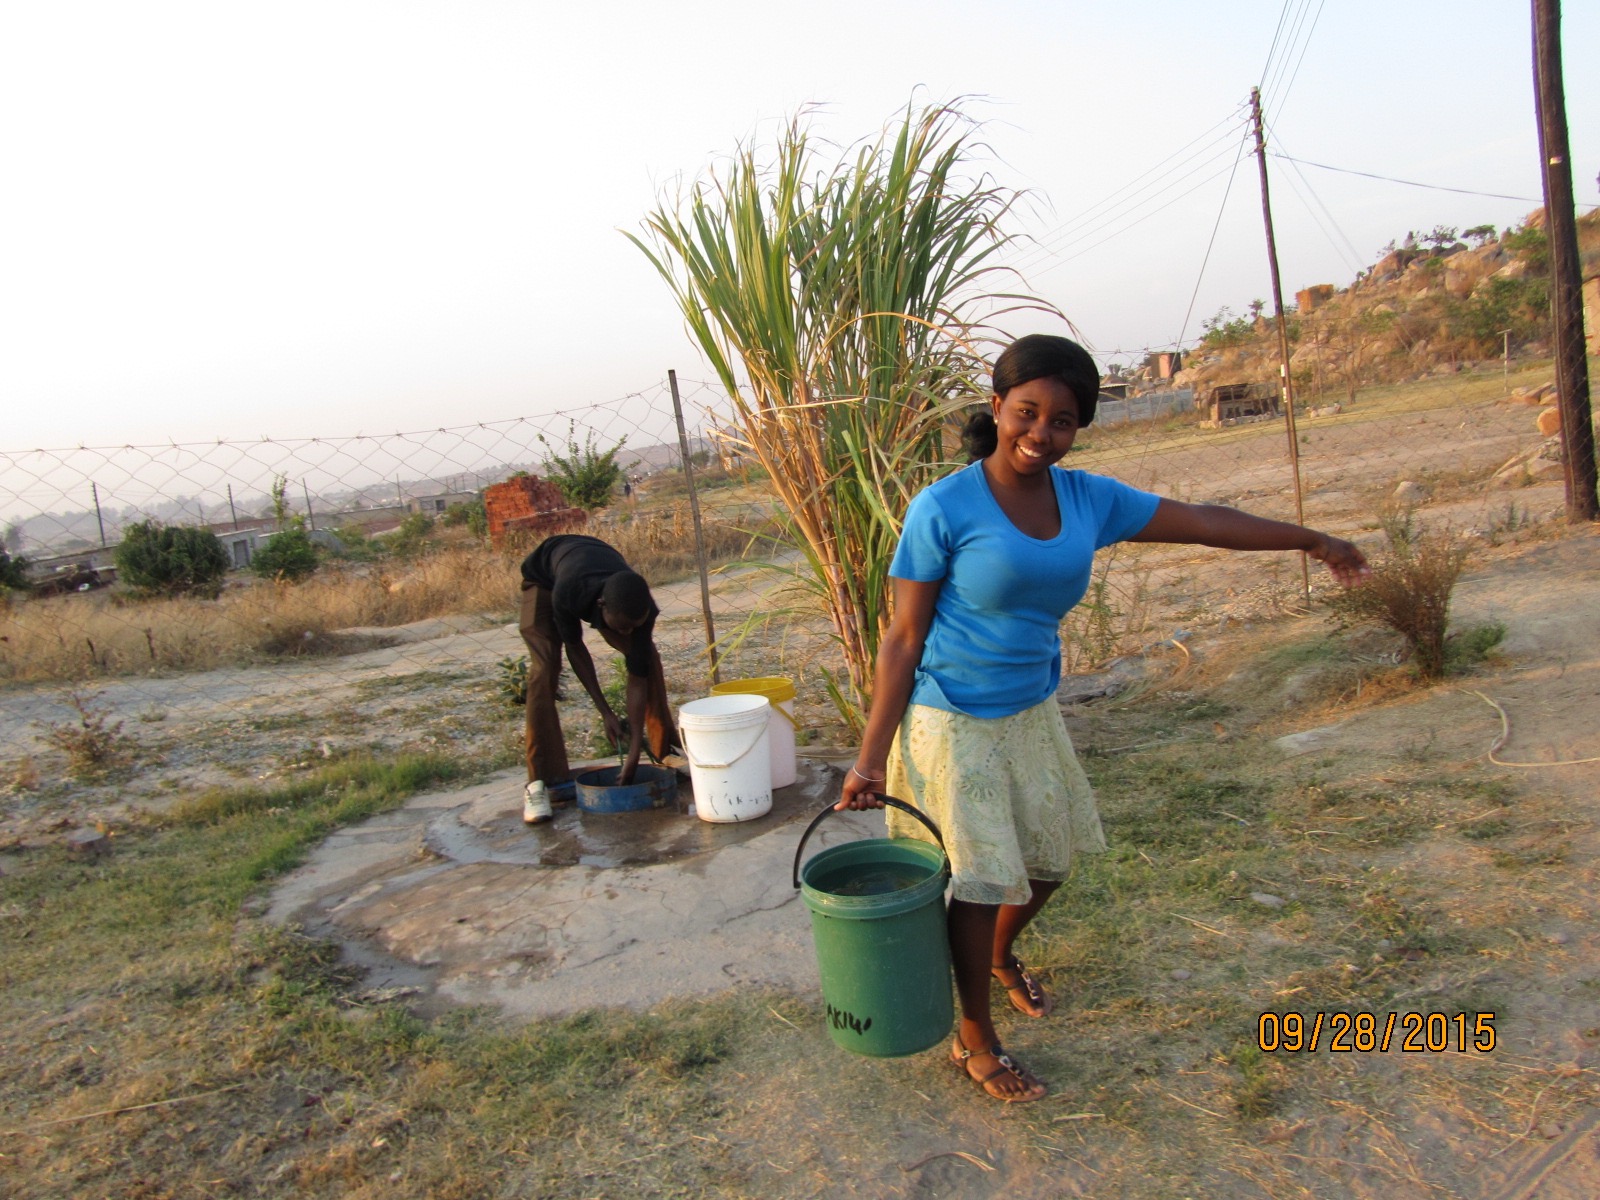 Sr. Claris’ niece Tafadzwa collects water from a well in Zimbabwe.